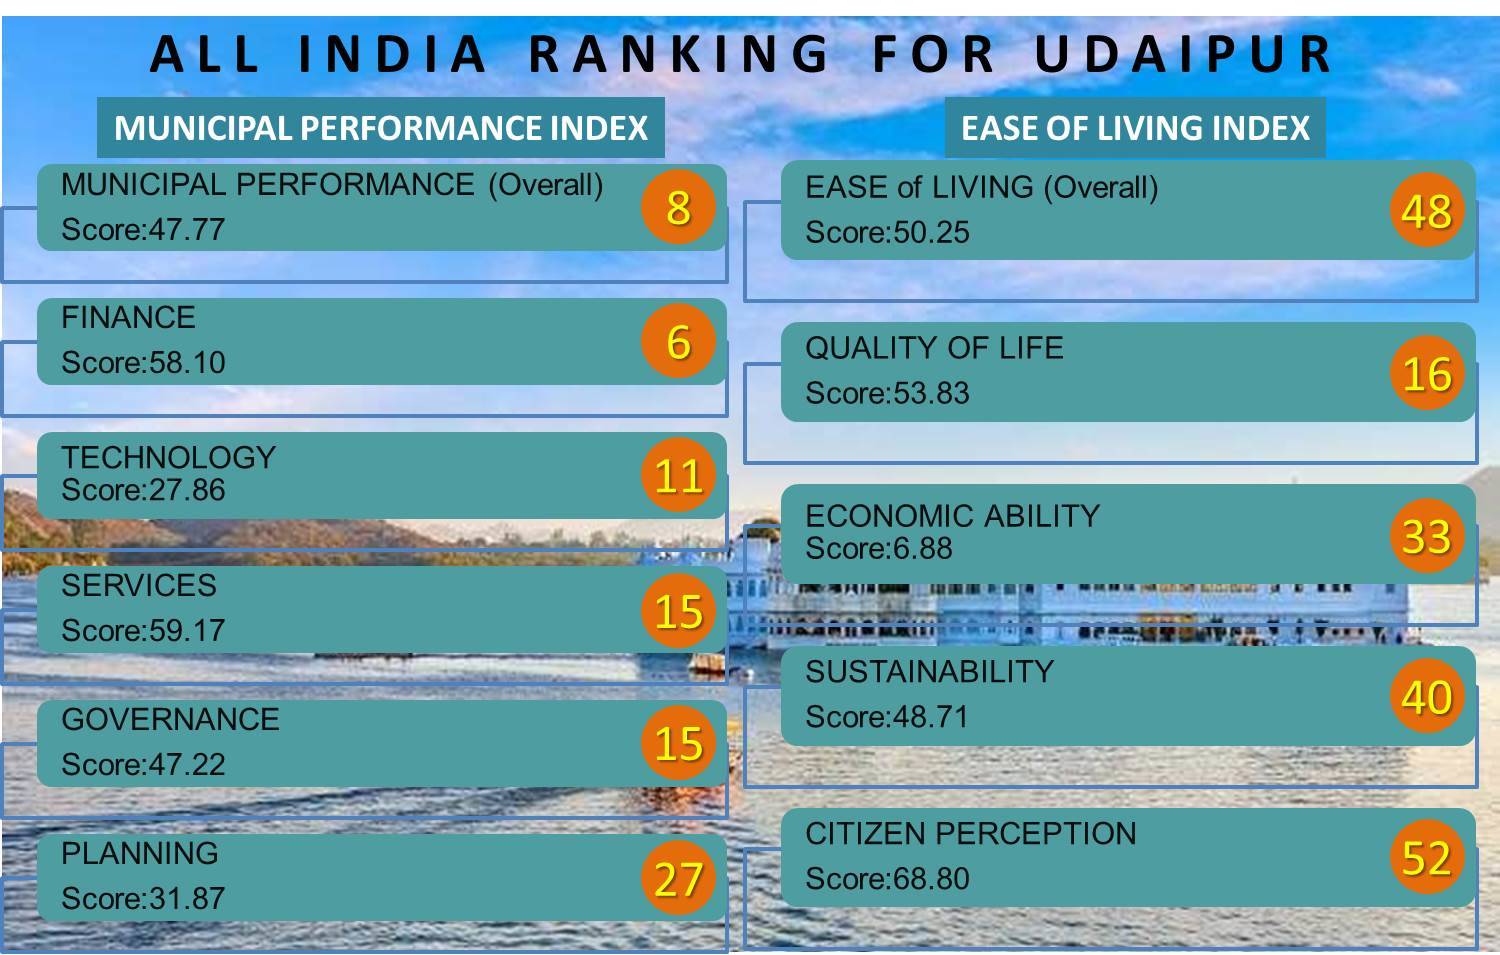 Udaipur ranks 8th in municipal performance and 16th in Quality of Life | Jaipur, Jodhpur, Ajmer winners from Rajasthan